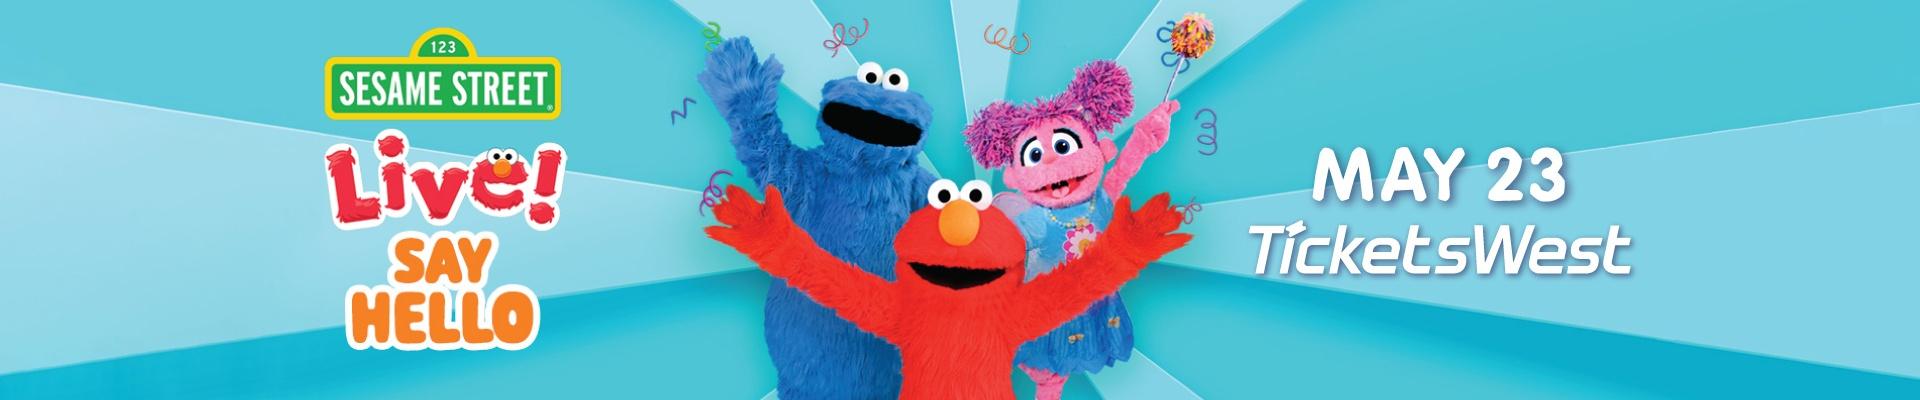 Sesame Street Live Say Hello May 23 TicketsWest